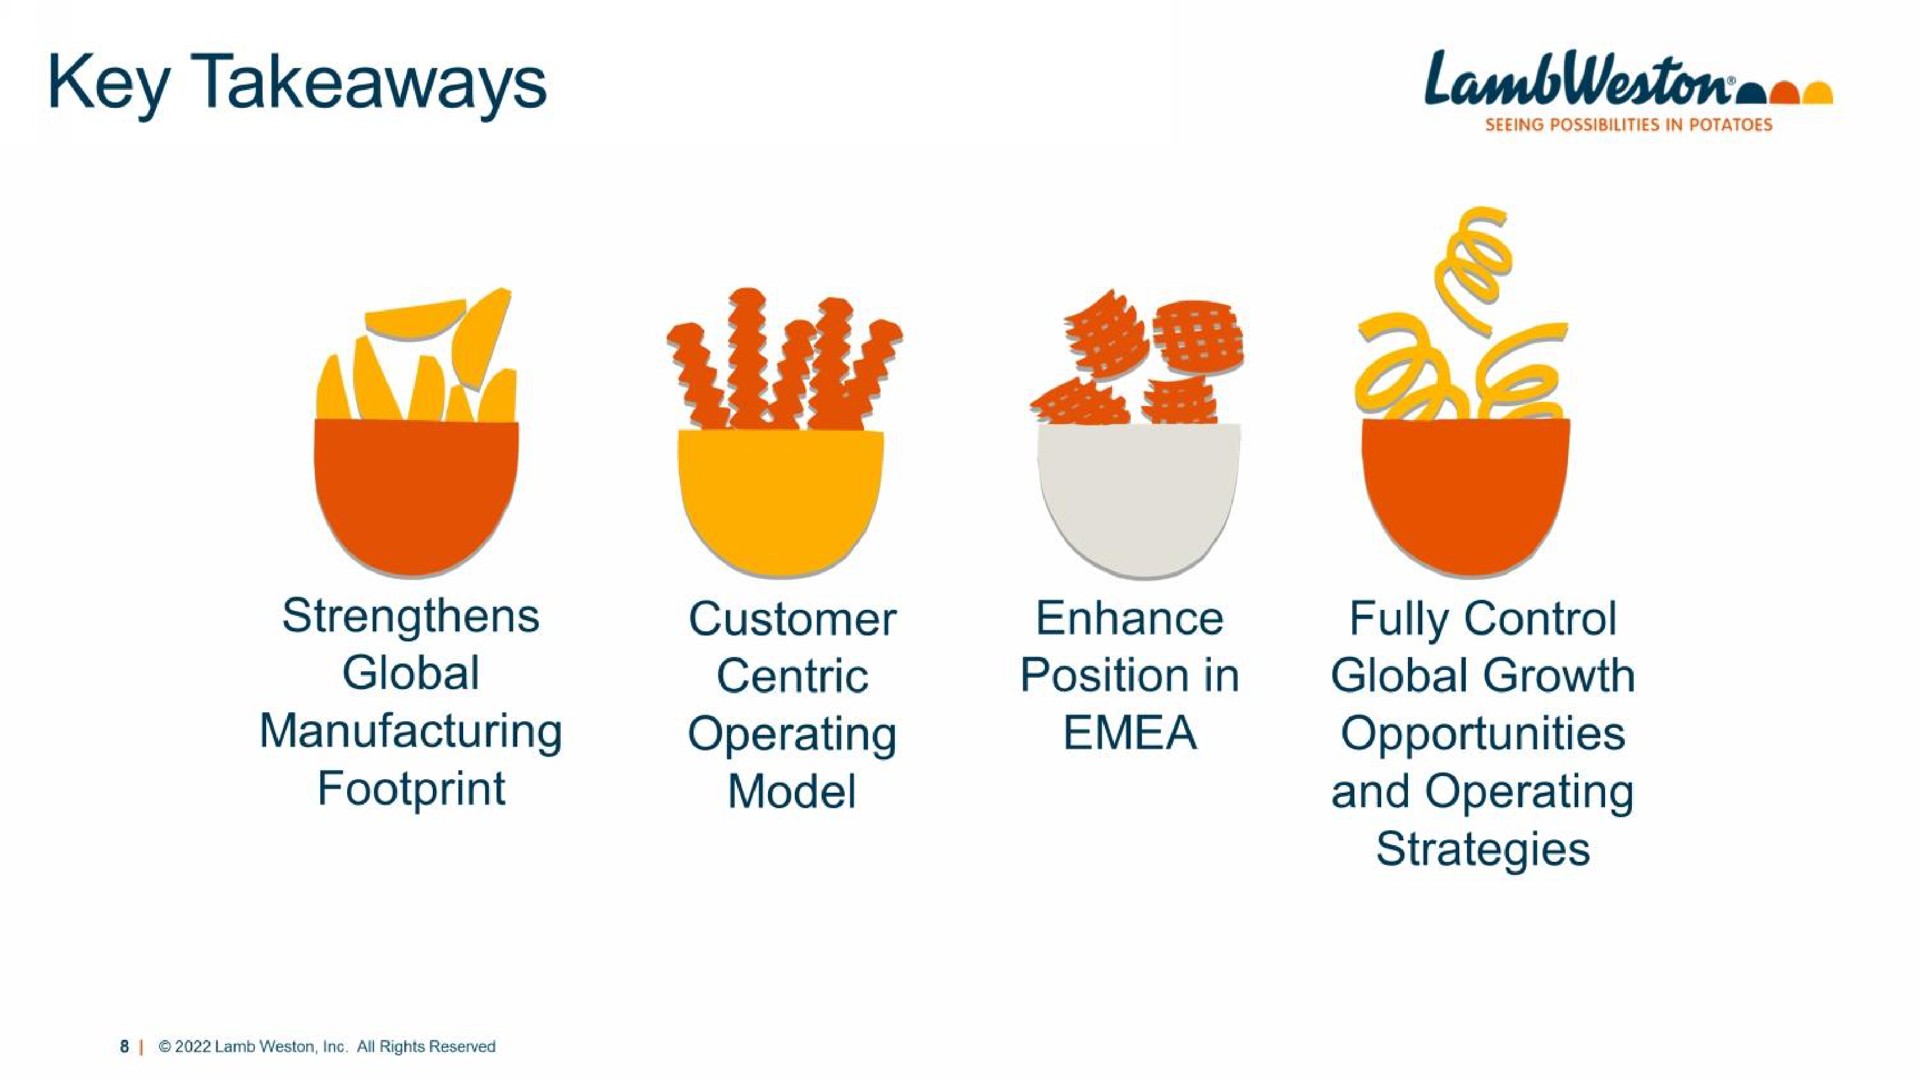 key enhance position in fully control global growth opportunities and operating strategies strengthens global manufacturing footprint customer centric operating model | Lamb Weston